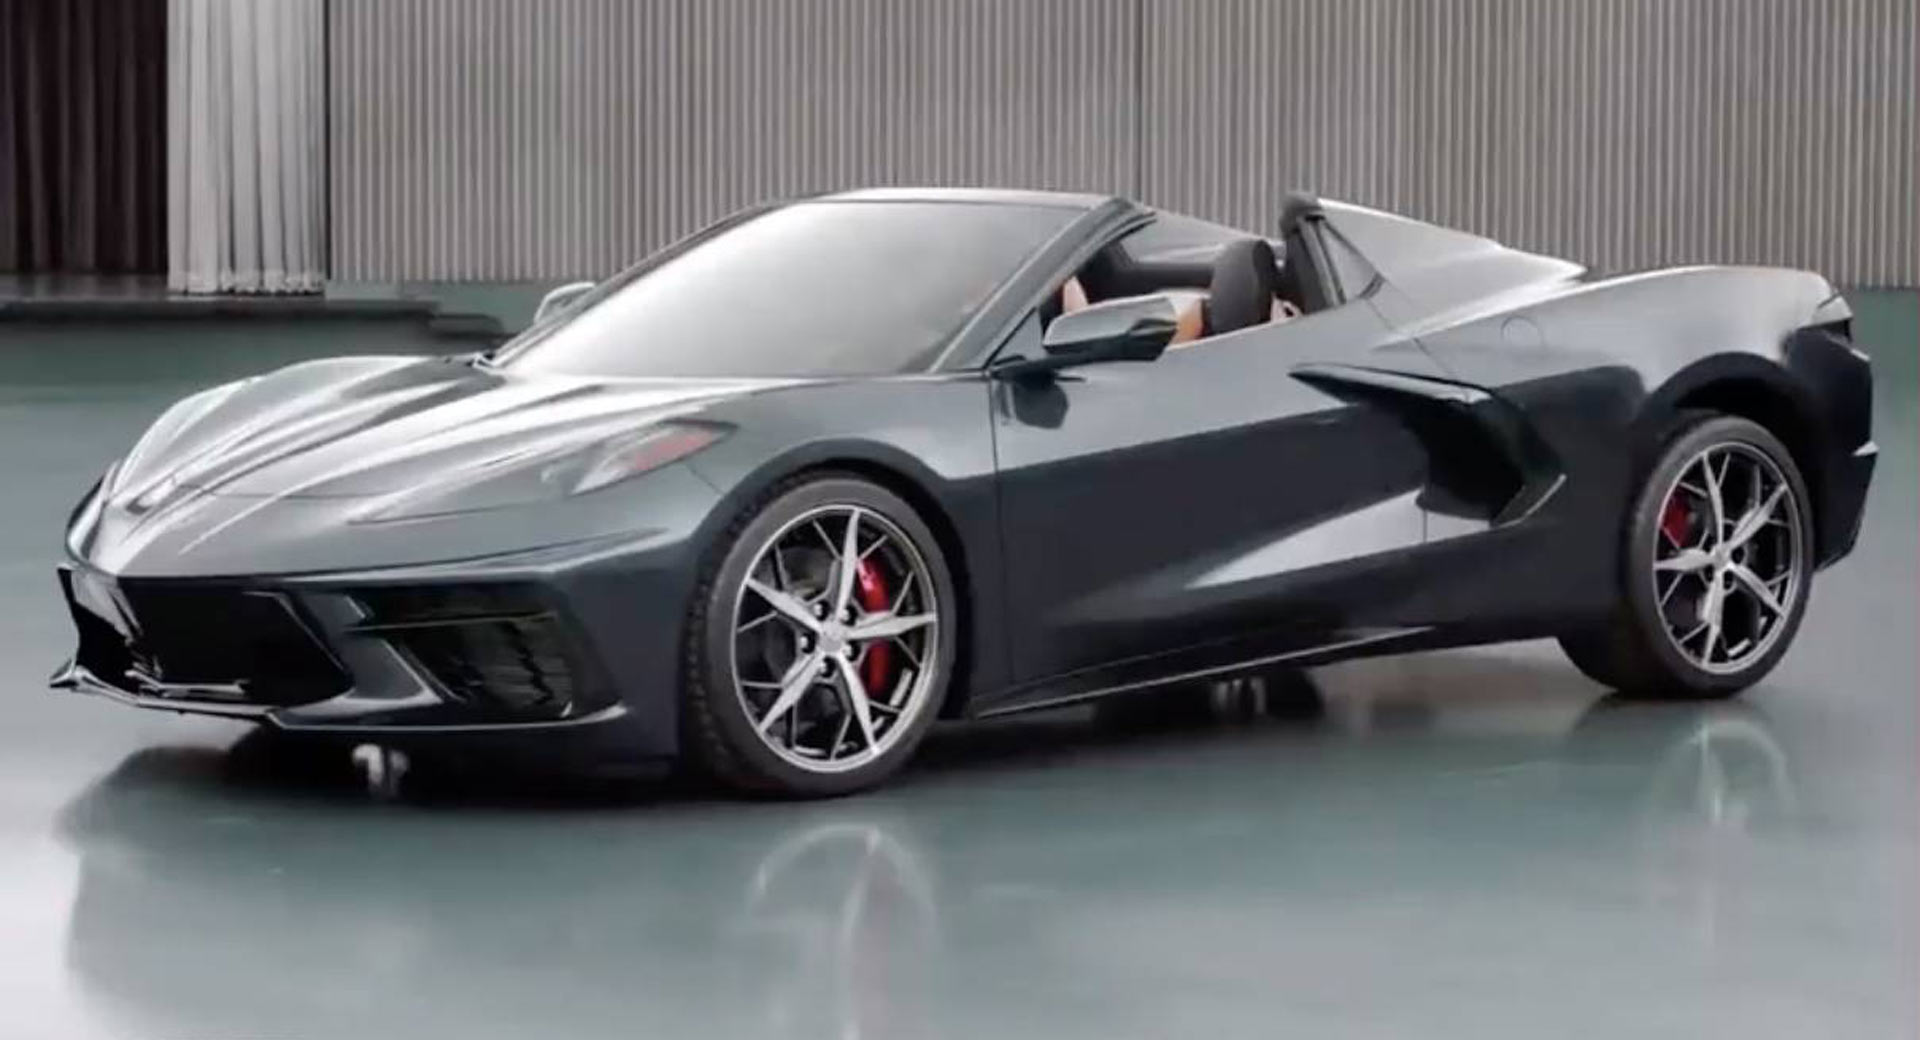 New Corvette Stingray Convertible Only Weighs 102 Pounds More Than